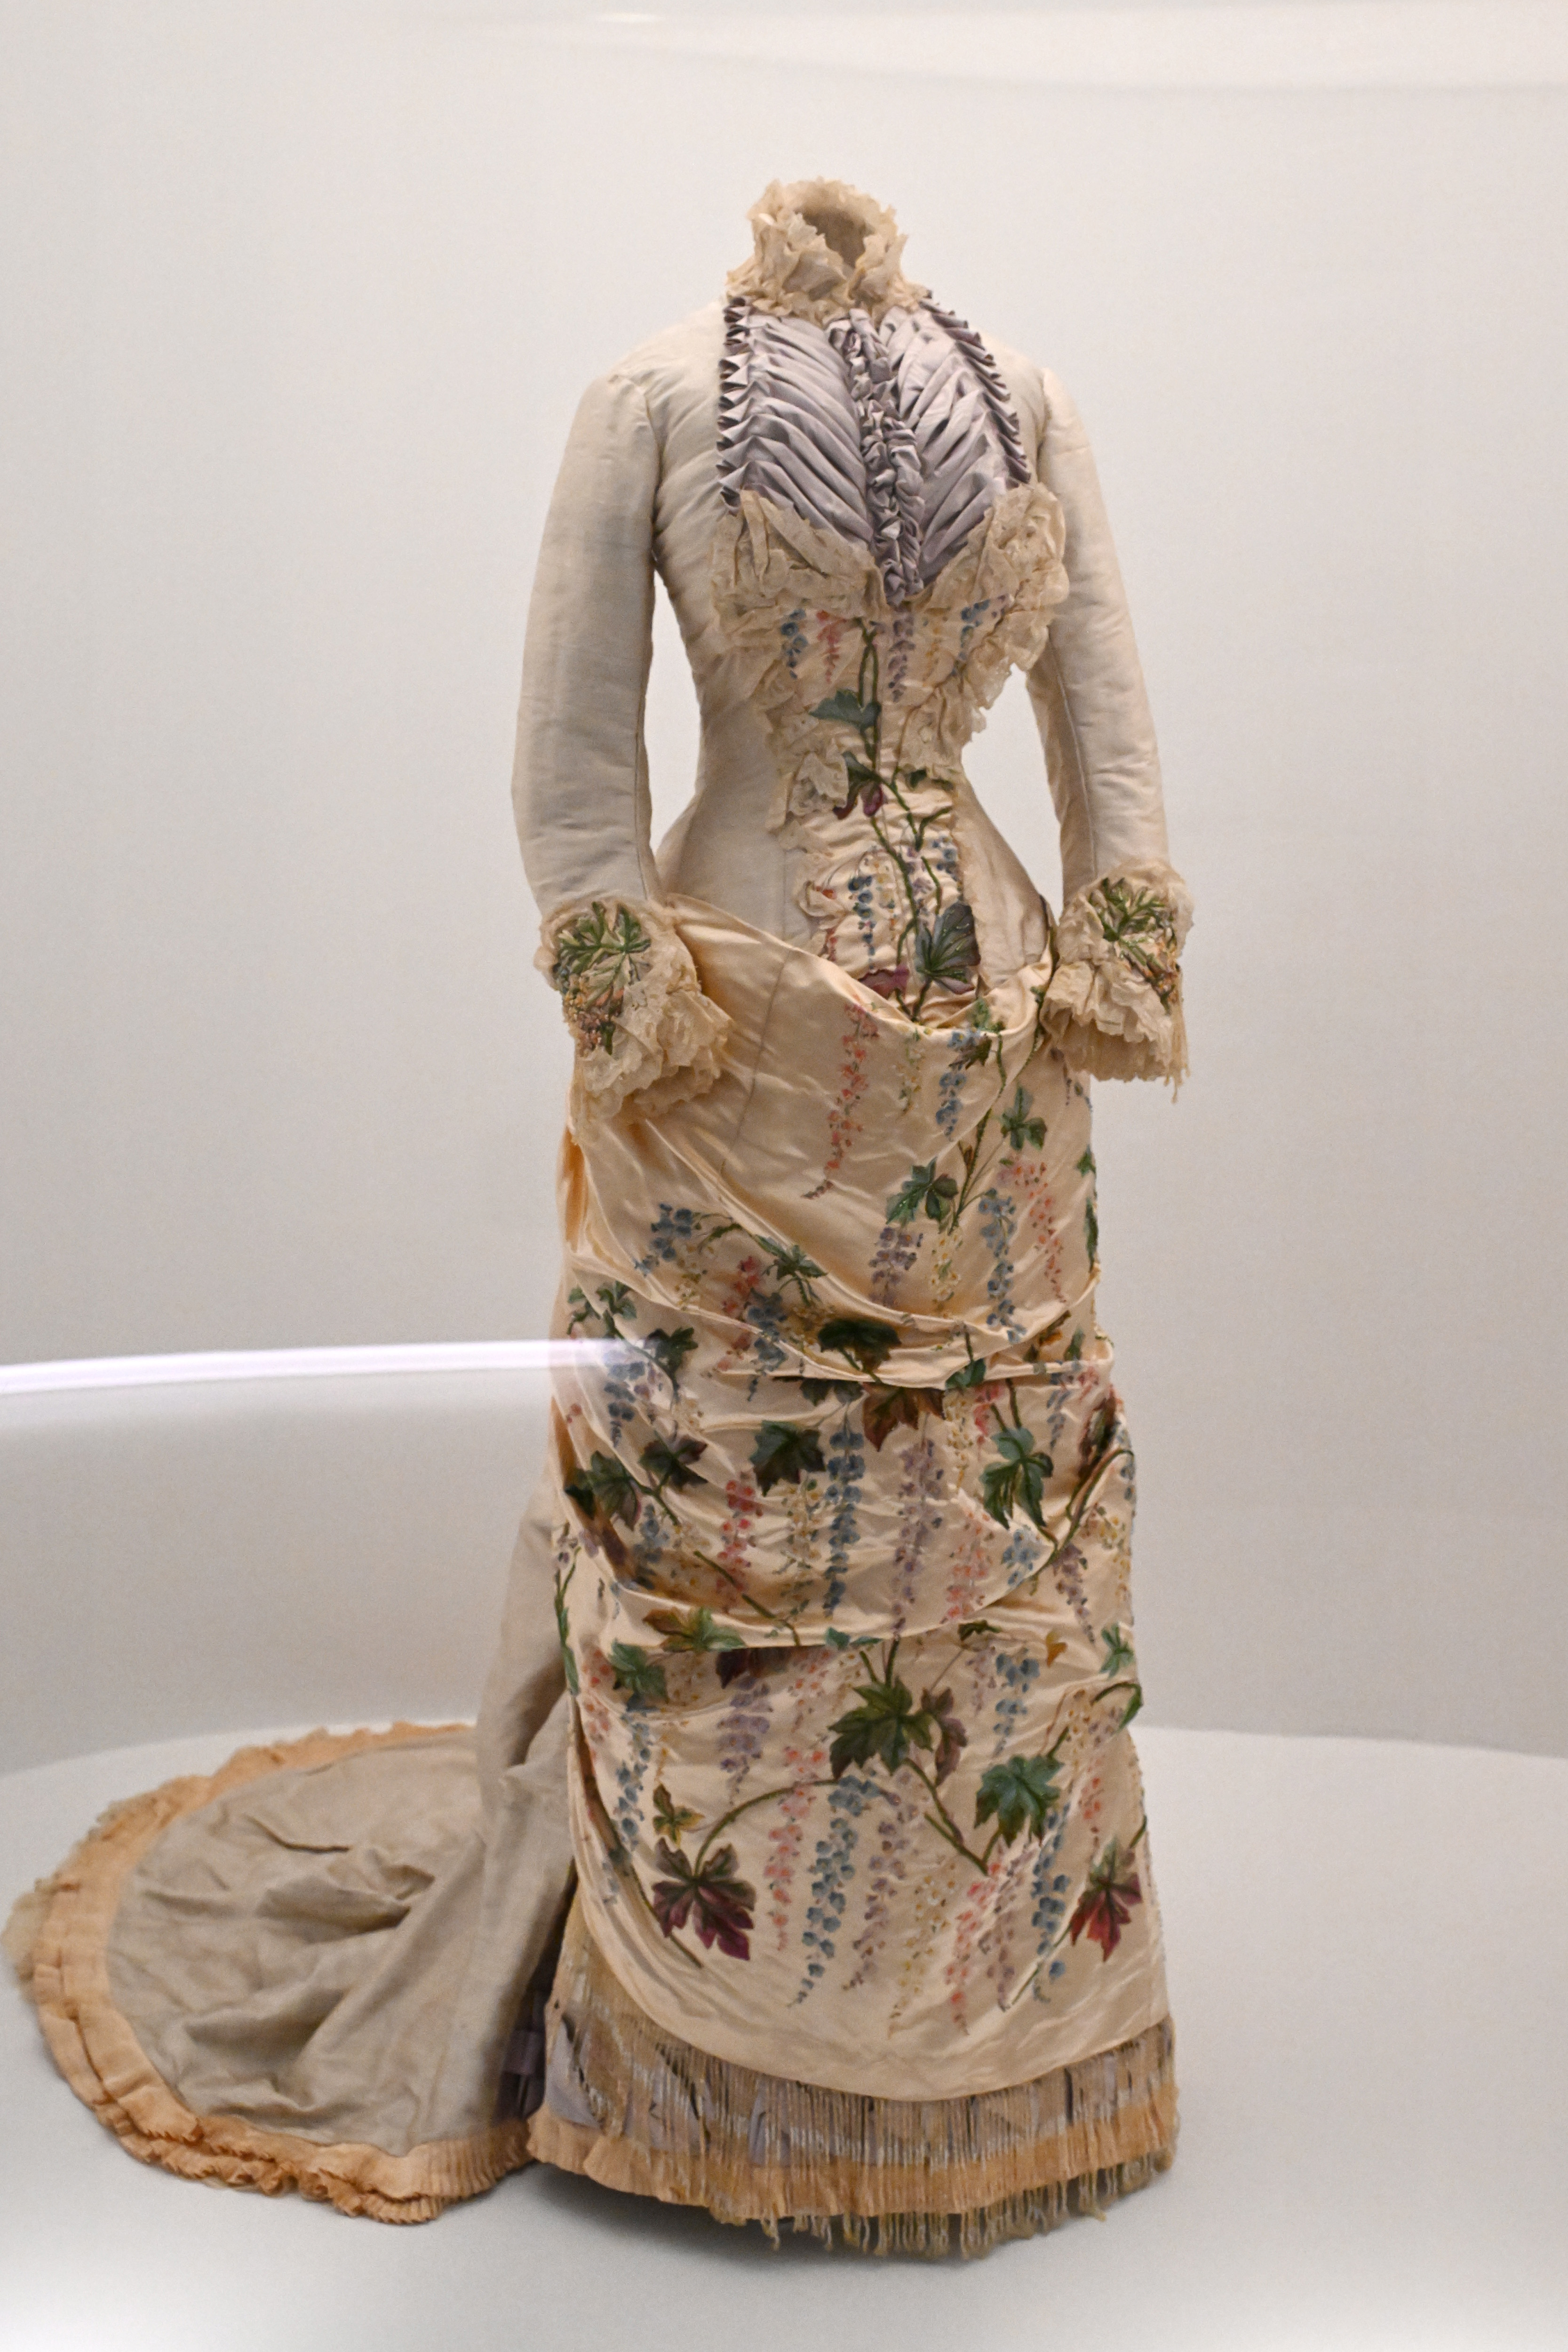 Vintage dress with floral patterns and fringed skirt on display